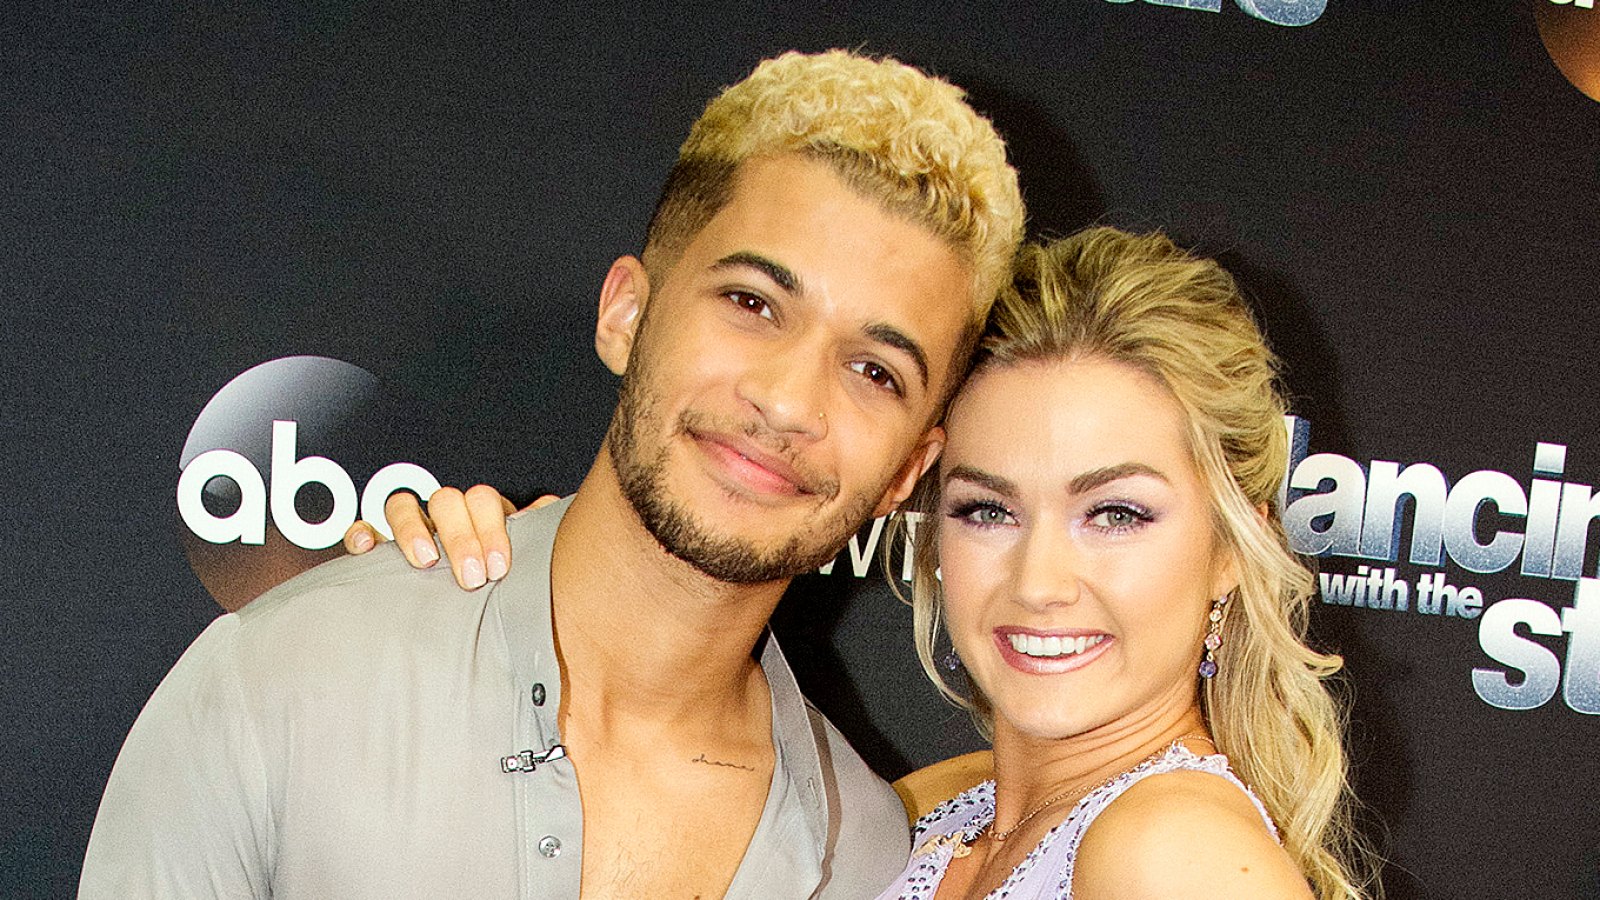 JORDAN FISHER, LINDSAY ARNOLD, Dancing With The Stars, DWTS